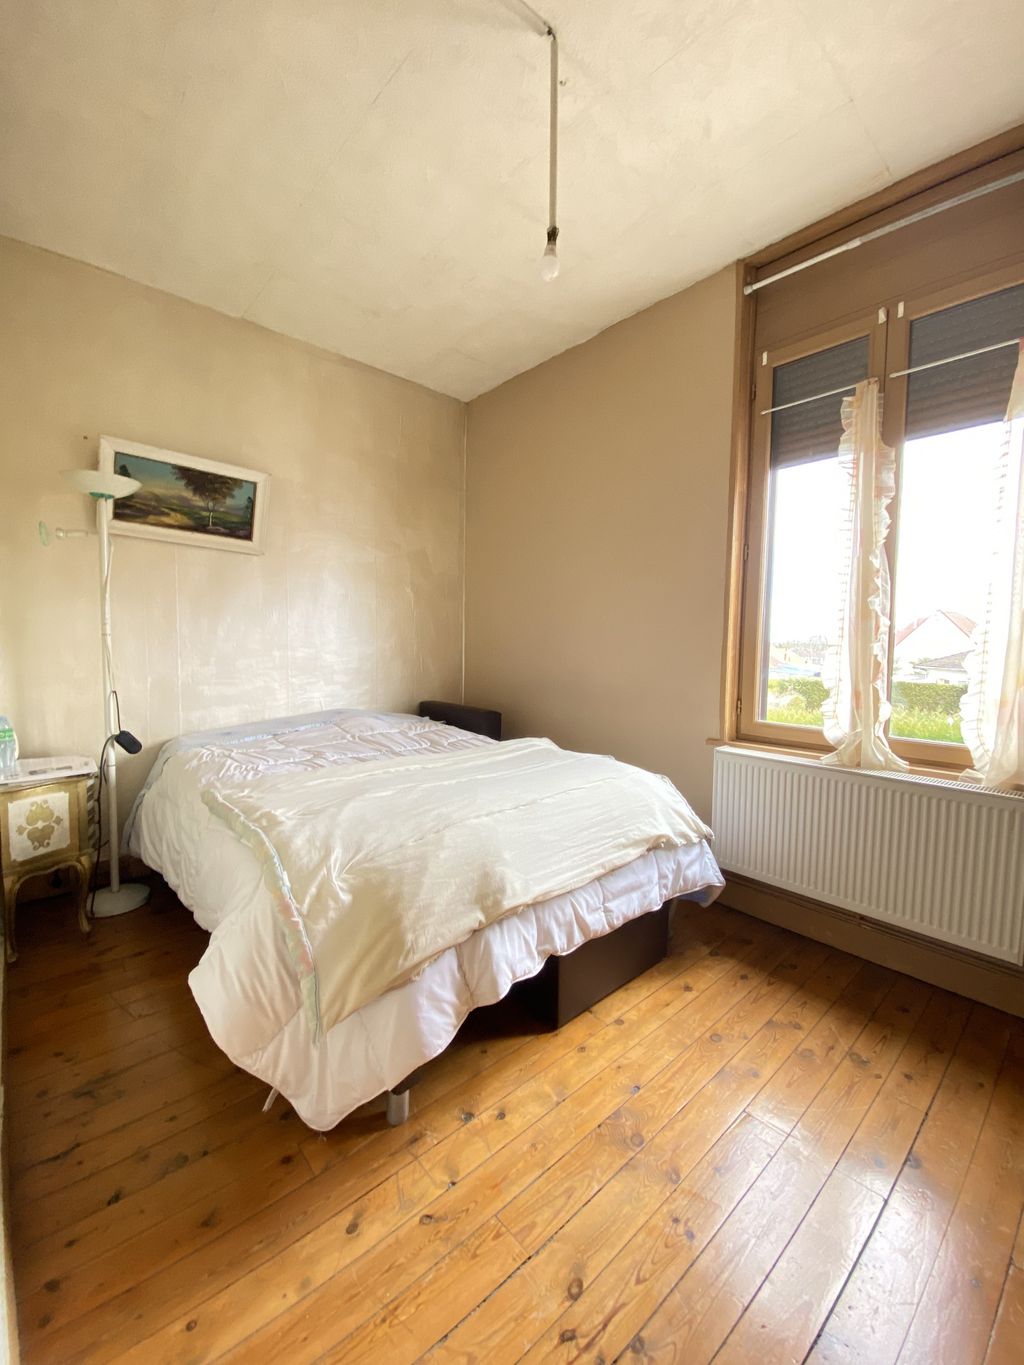 Achat maison 2 chambre(s) - Ailly-sur-Somme